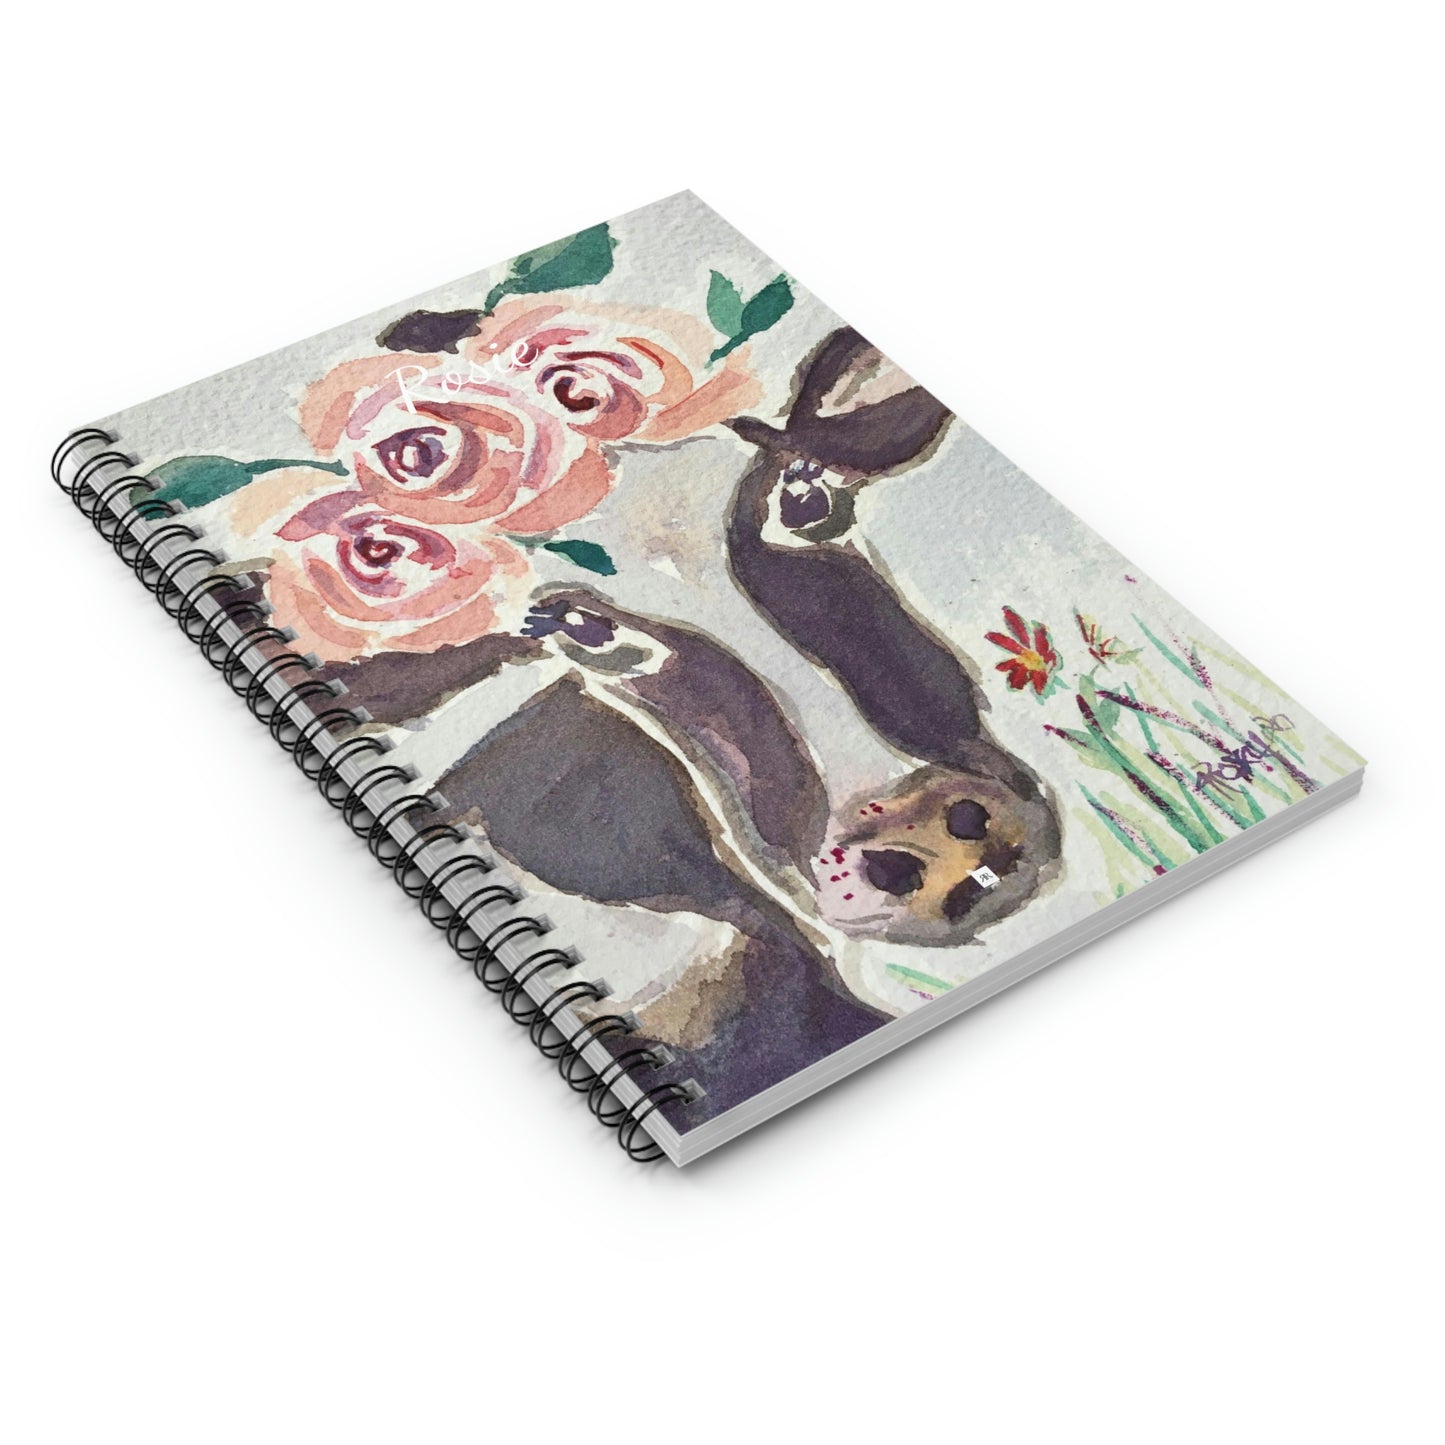 Rosie -Whimsical Cow Painting  Spiral Notebook